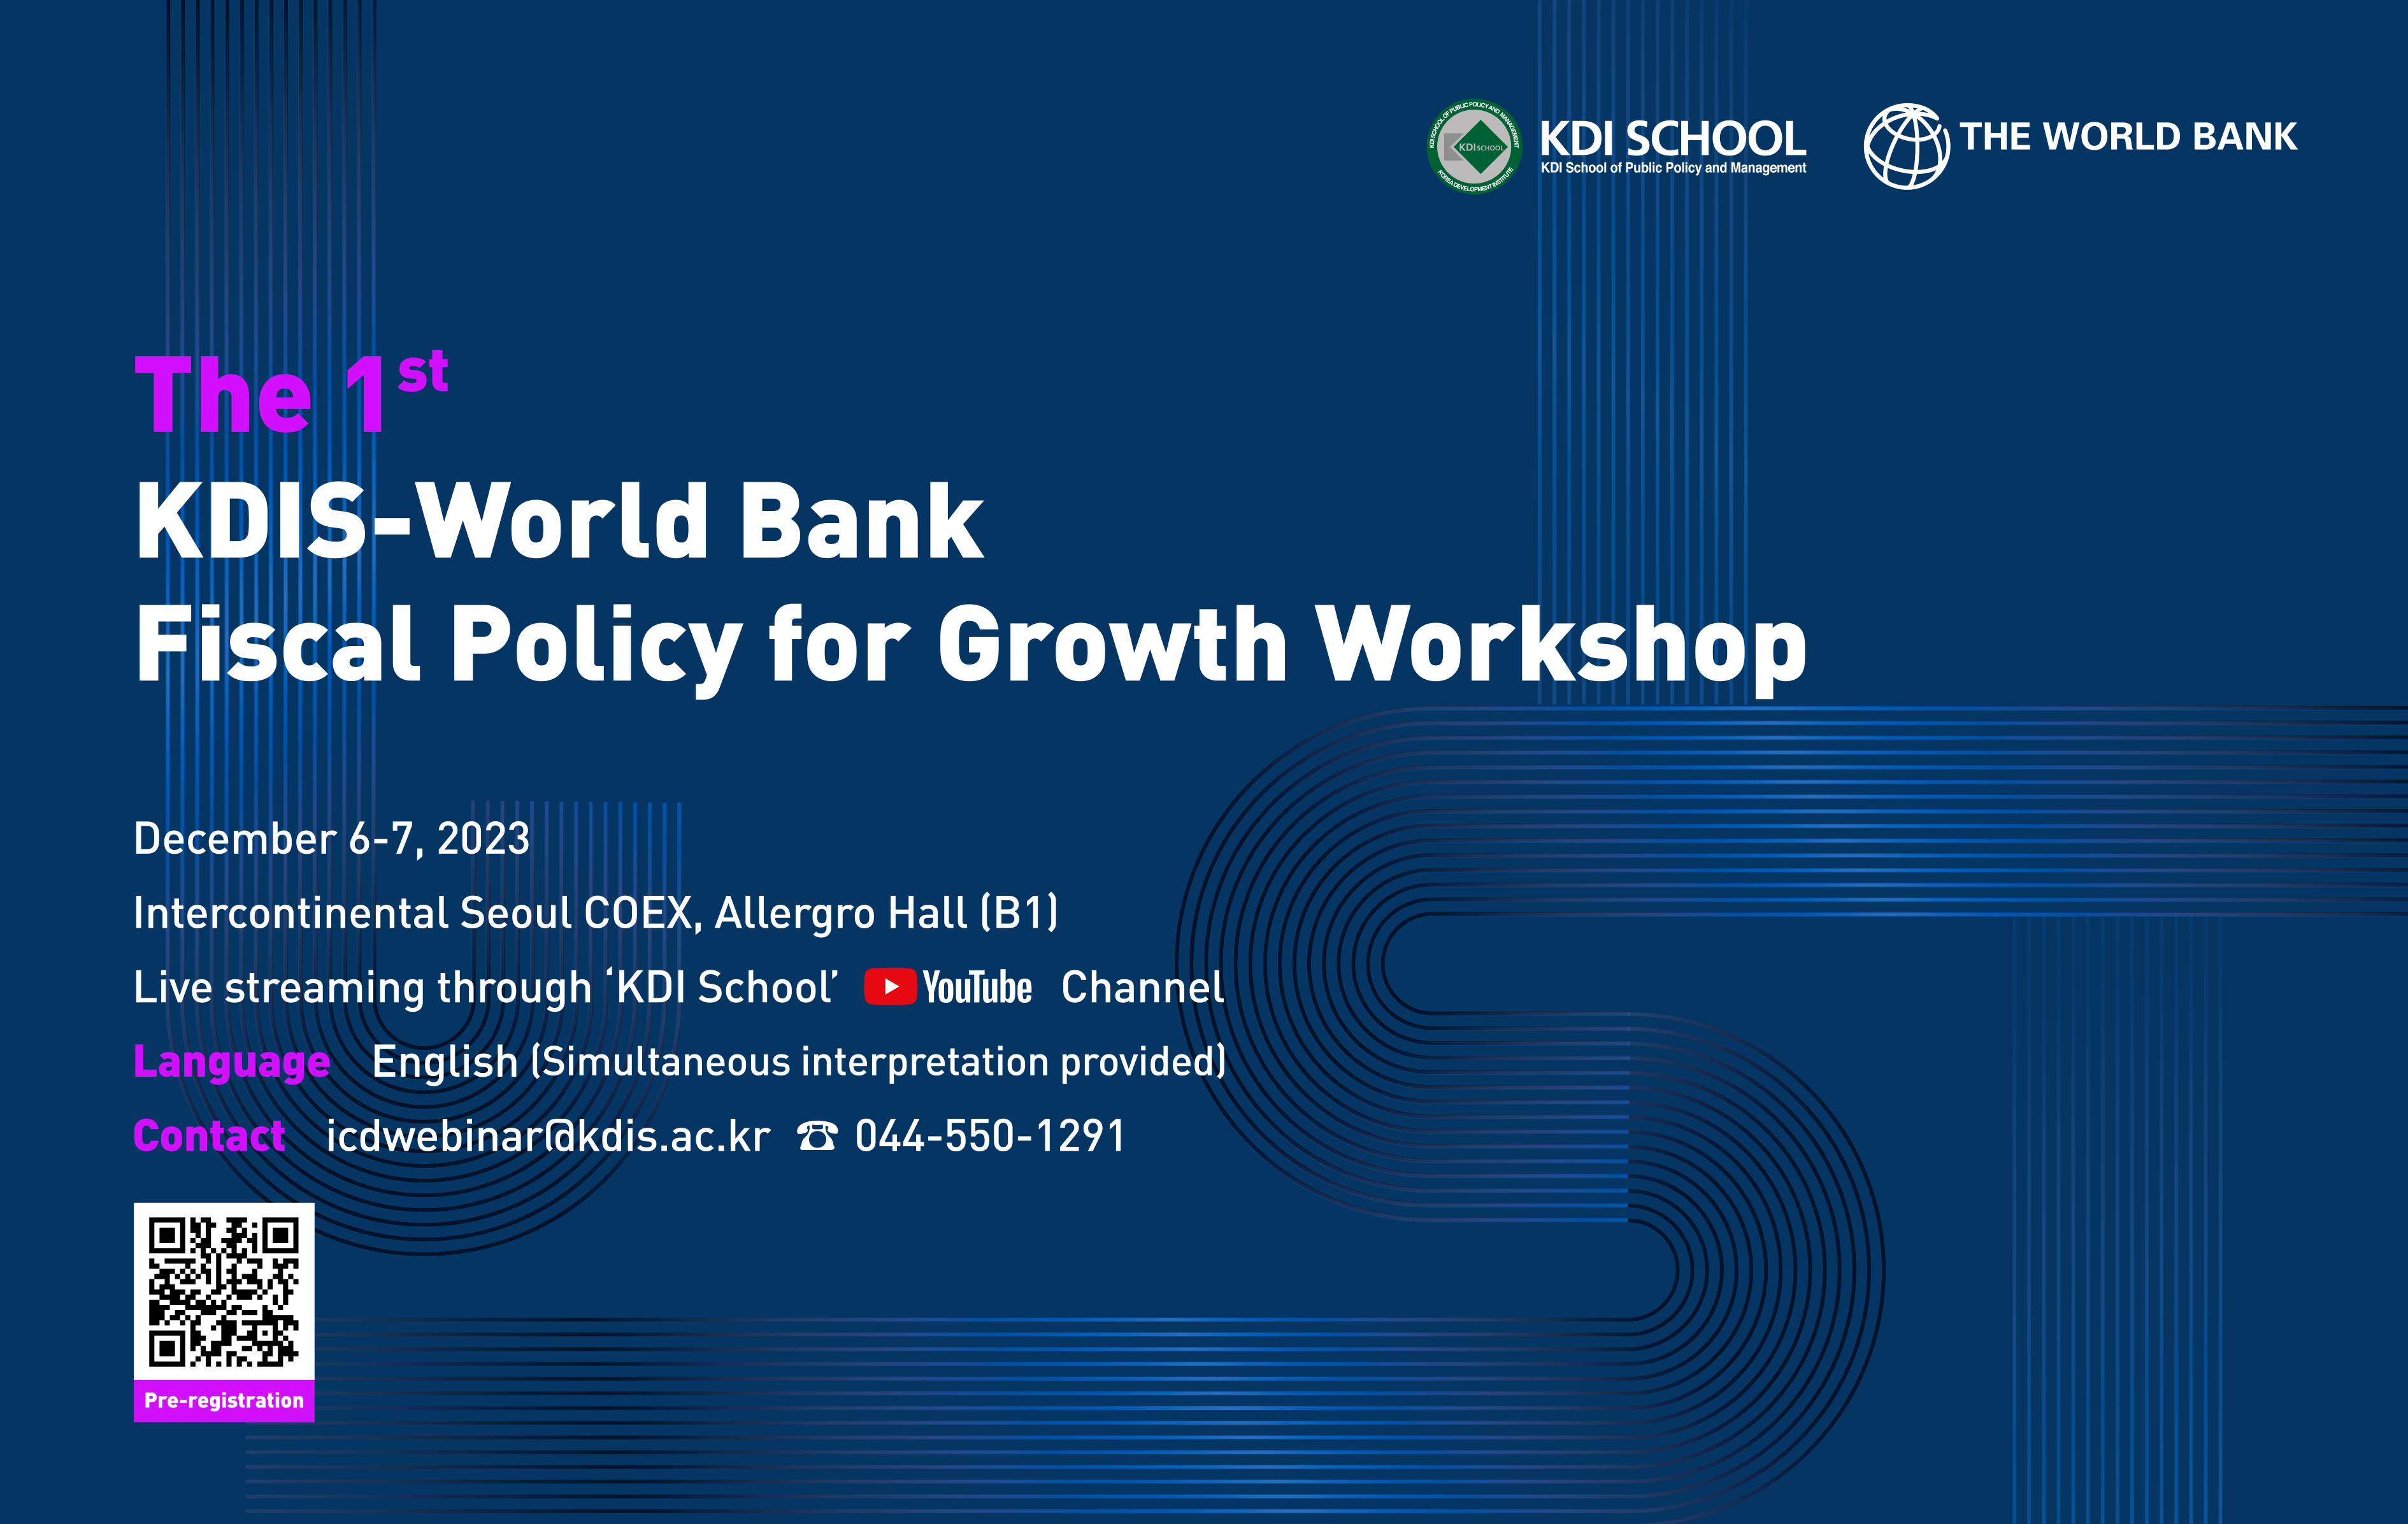 The 1st KDIS-WB Fiscal Policy for Growth Workshop